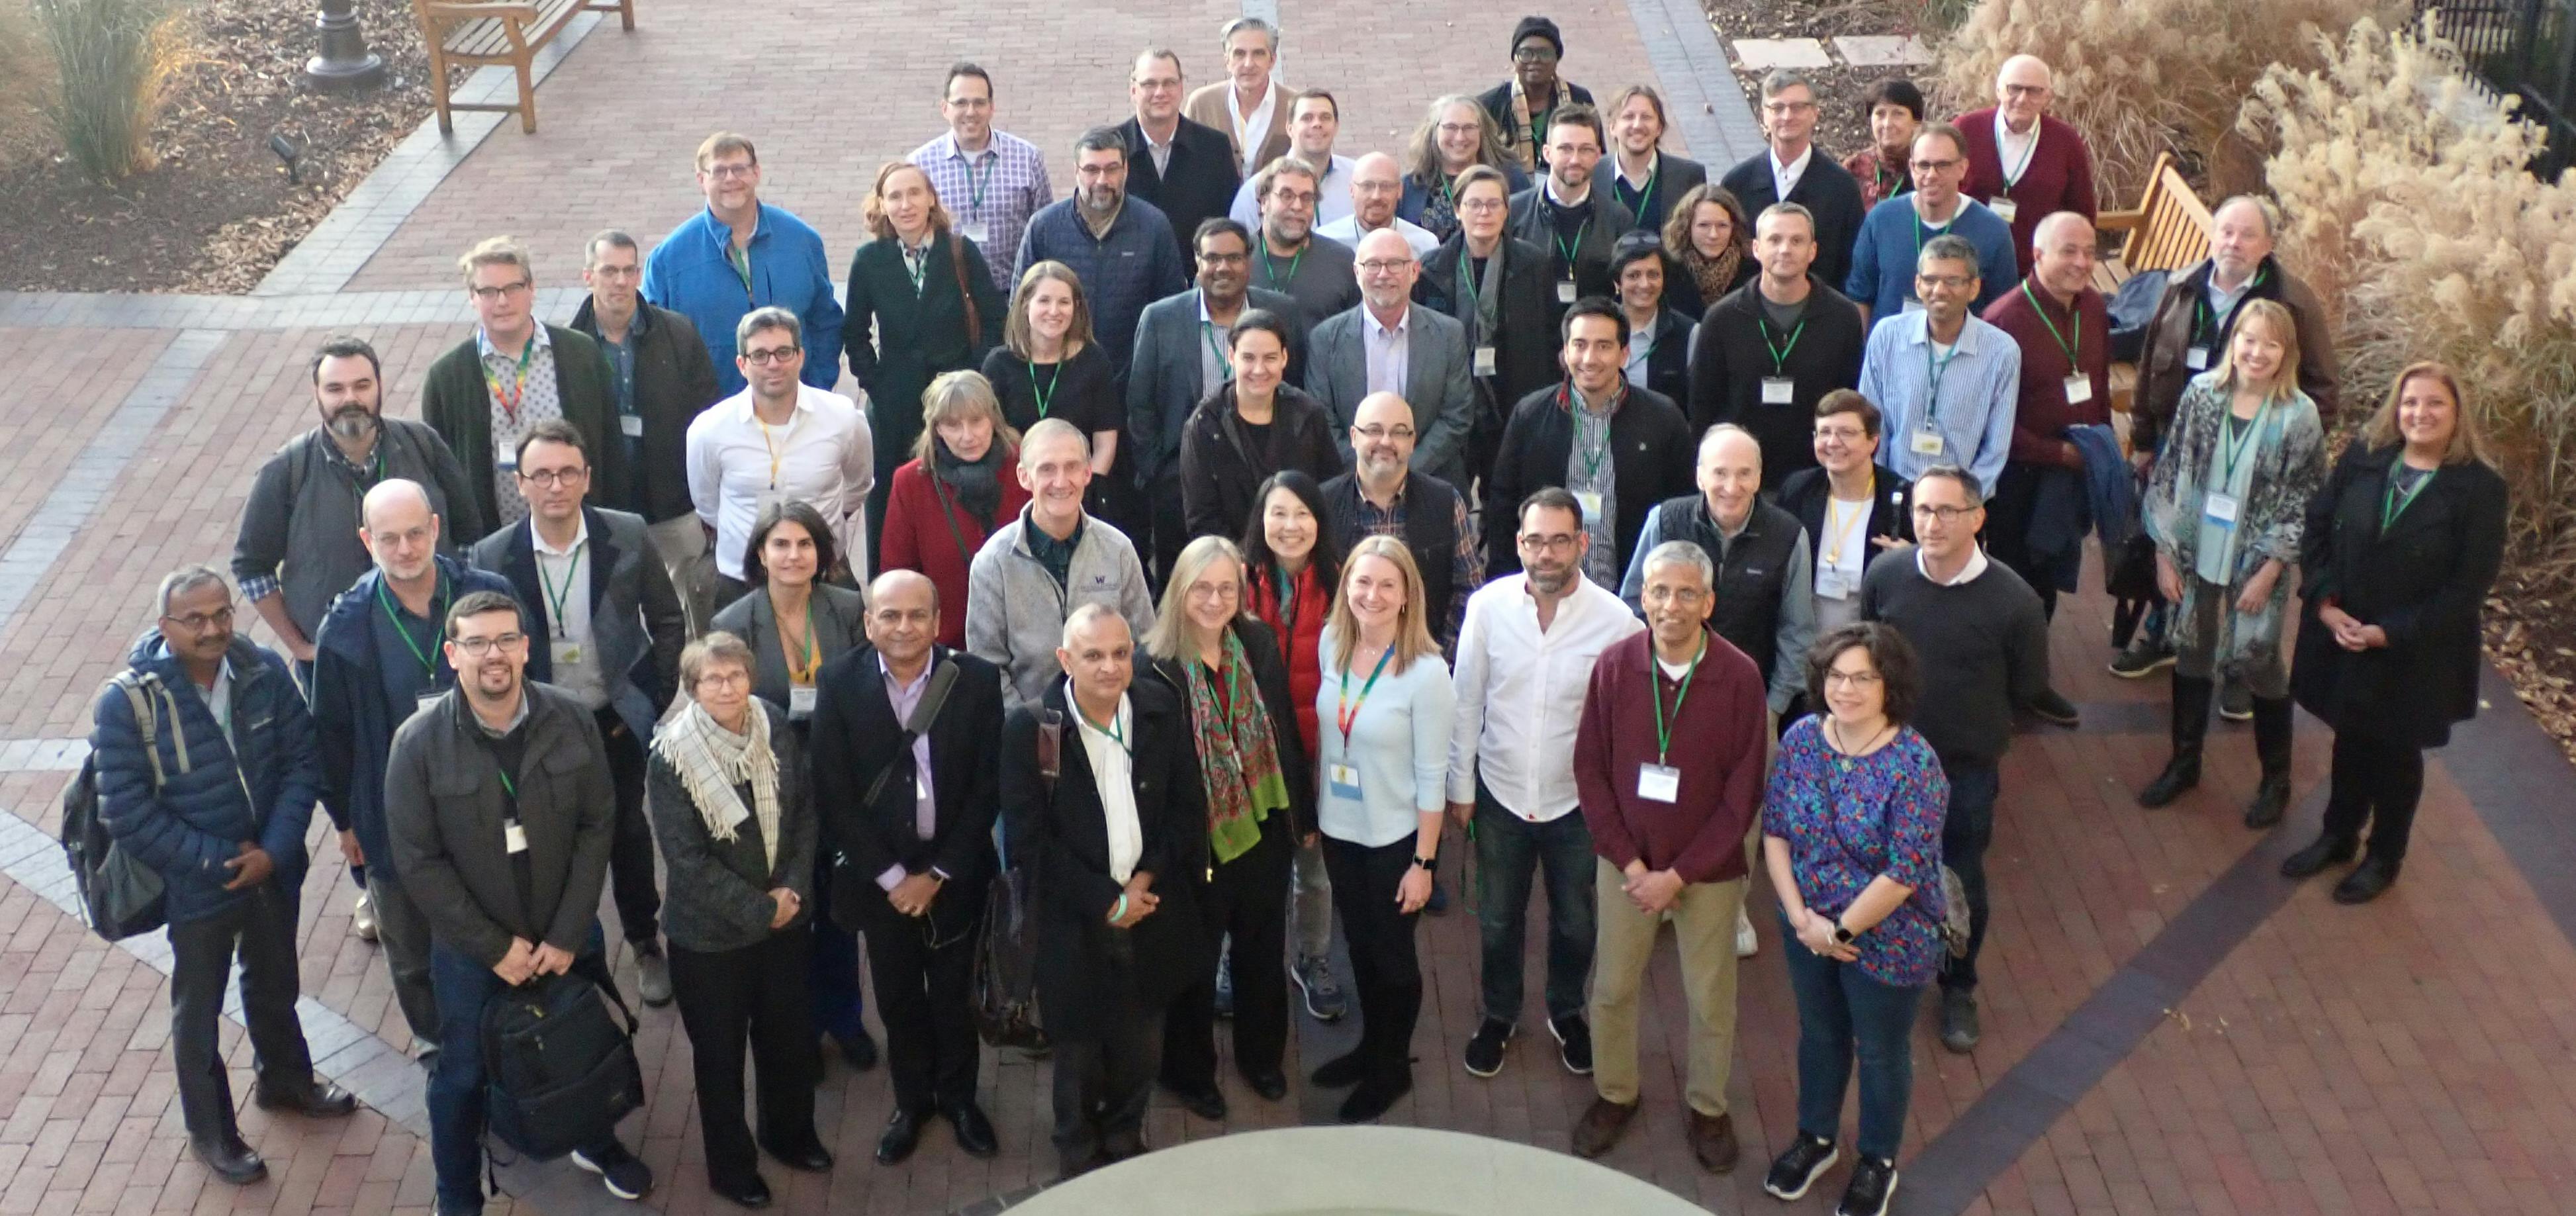 Data Science Leaders Summit group photo from 2019